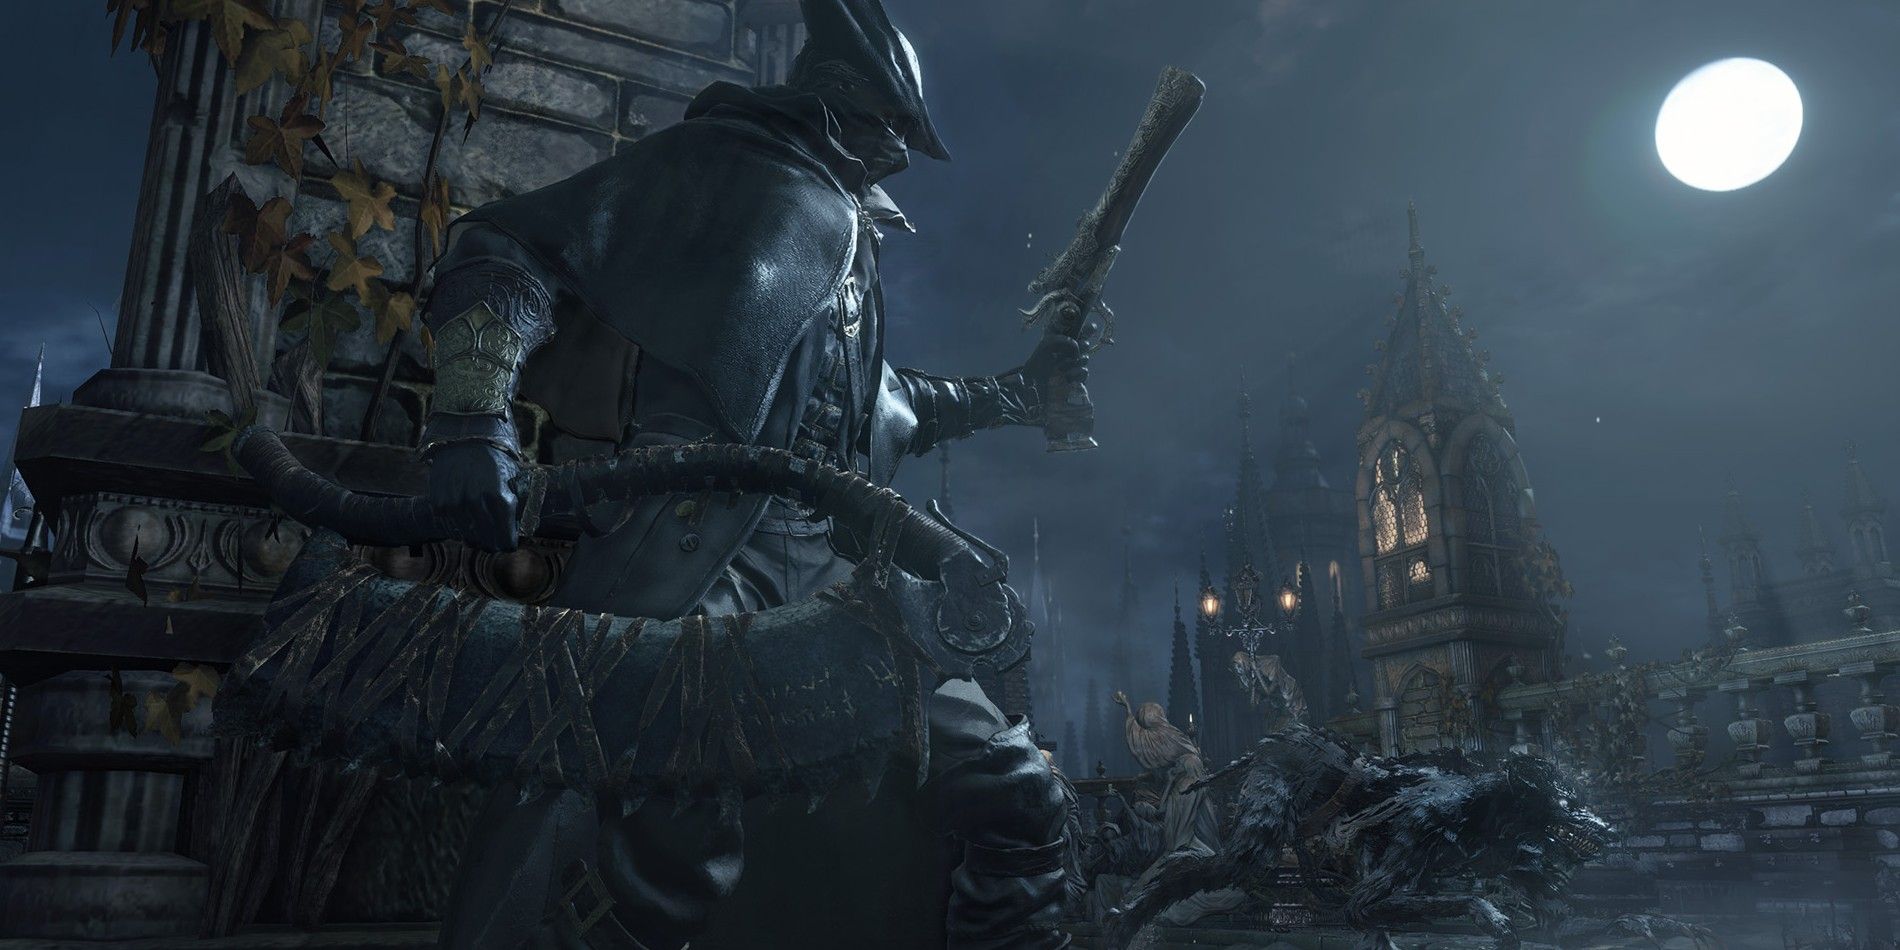 Character in Bloodborne Trailer